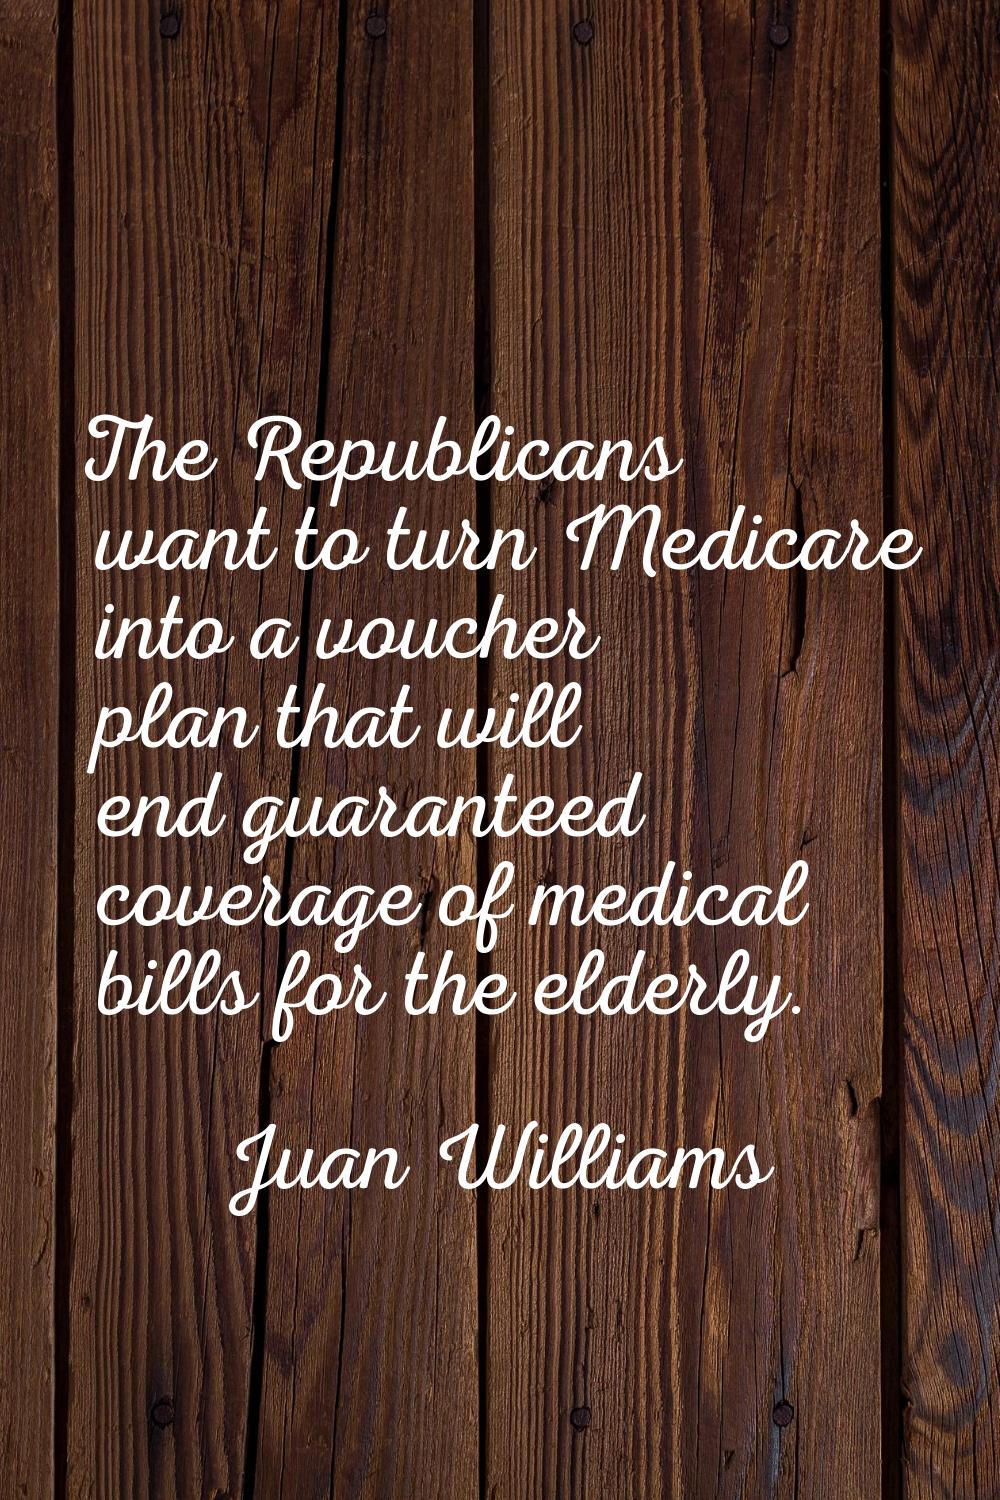 The Republicans want to turn Medicare into a voucher plan that will end guaranteed coverage of medi